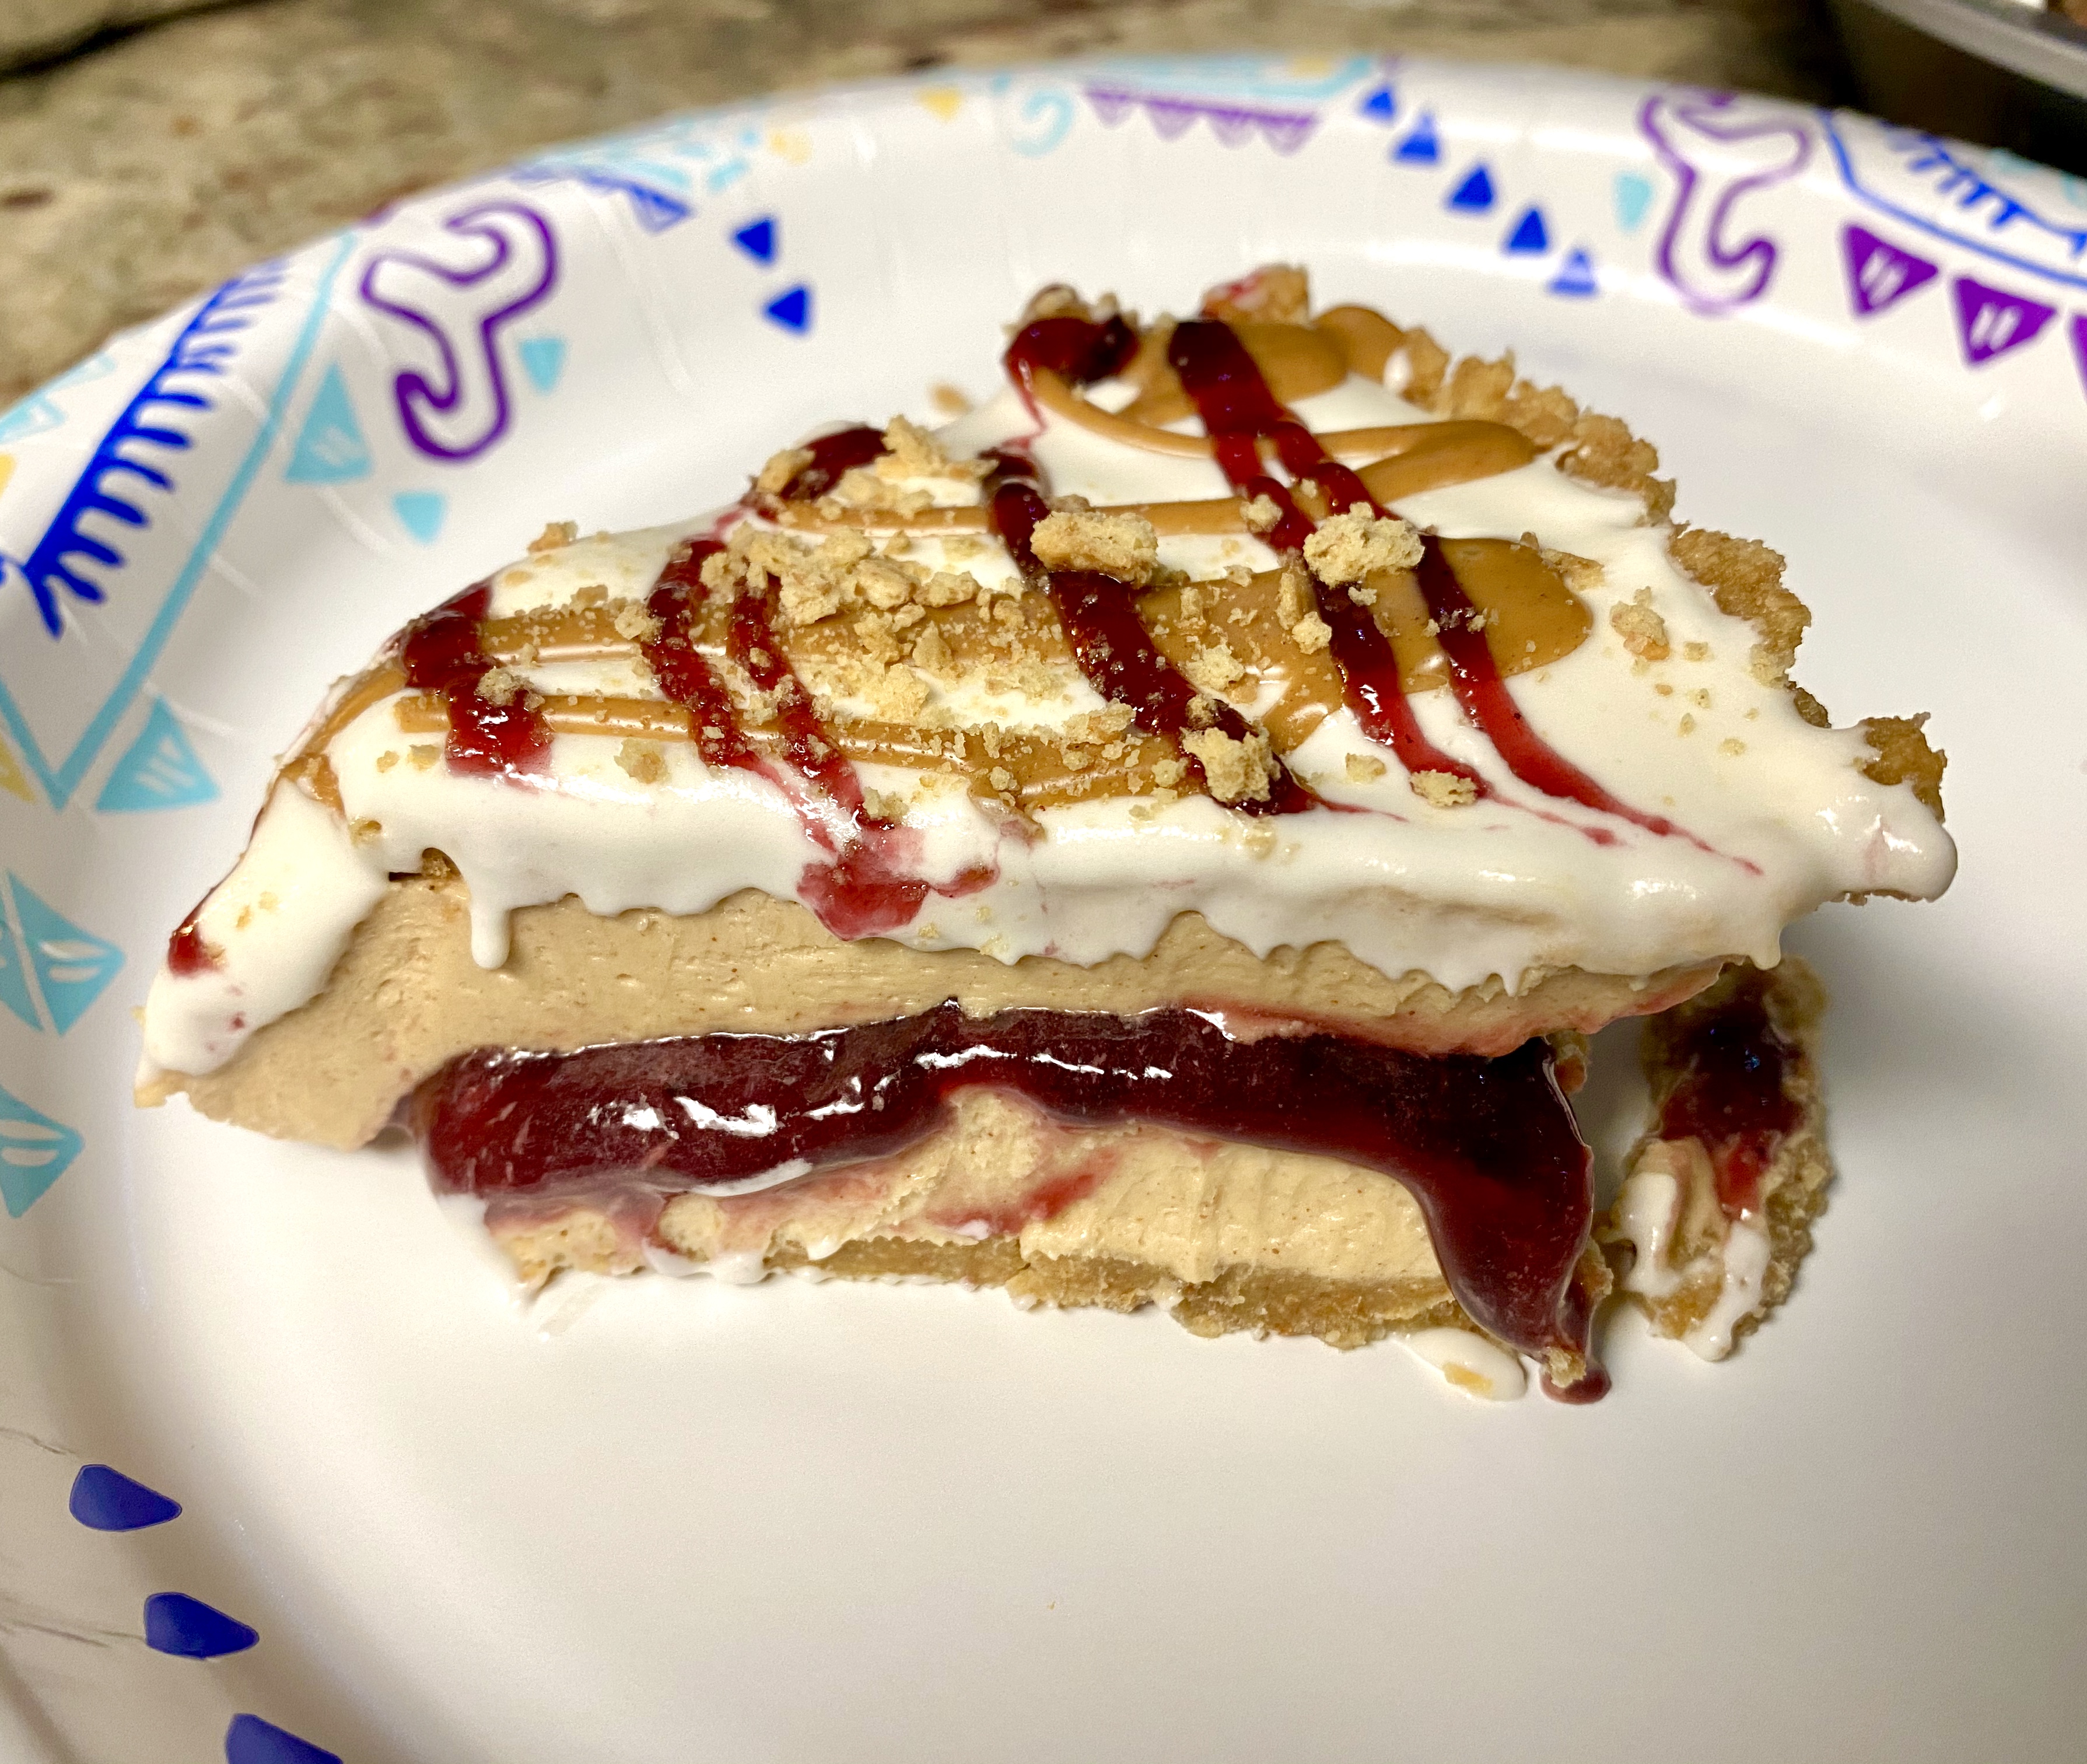 No-Bake Peanut Butter and Jelly Pie